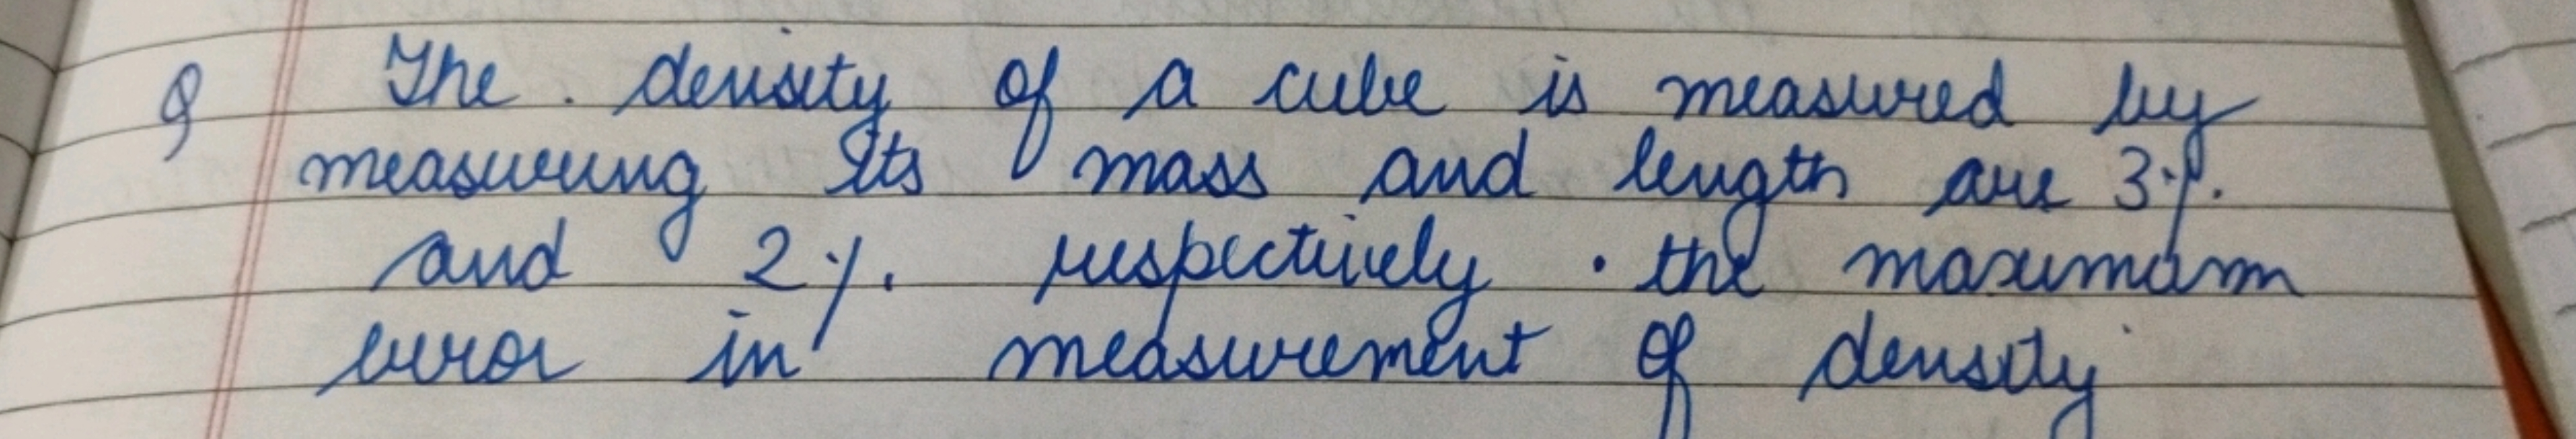 Q The. density of a cube is measured by measuring ts mass and length a